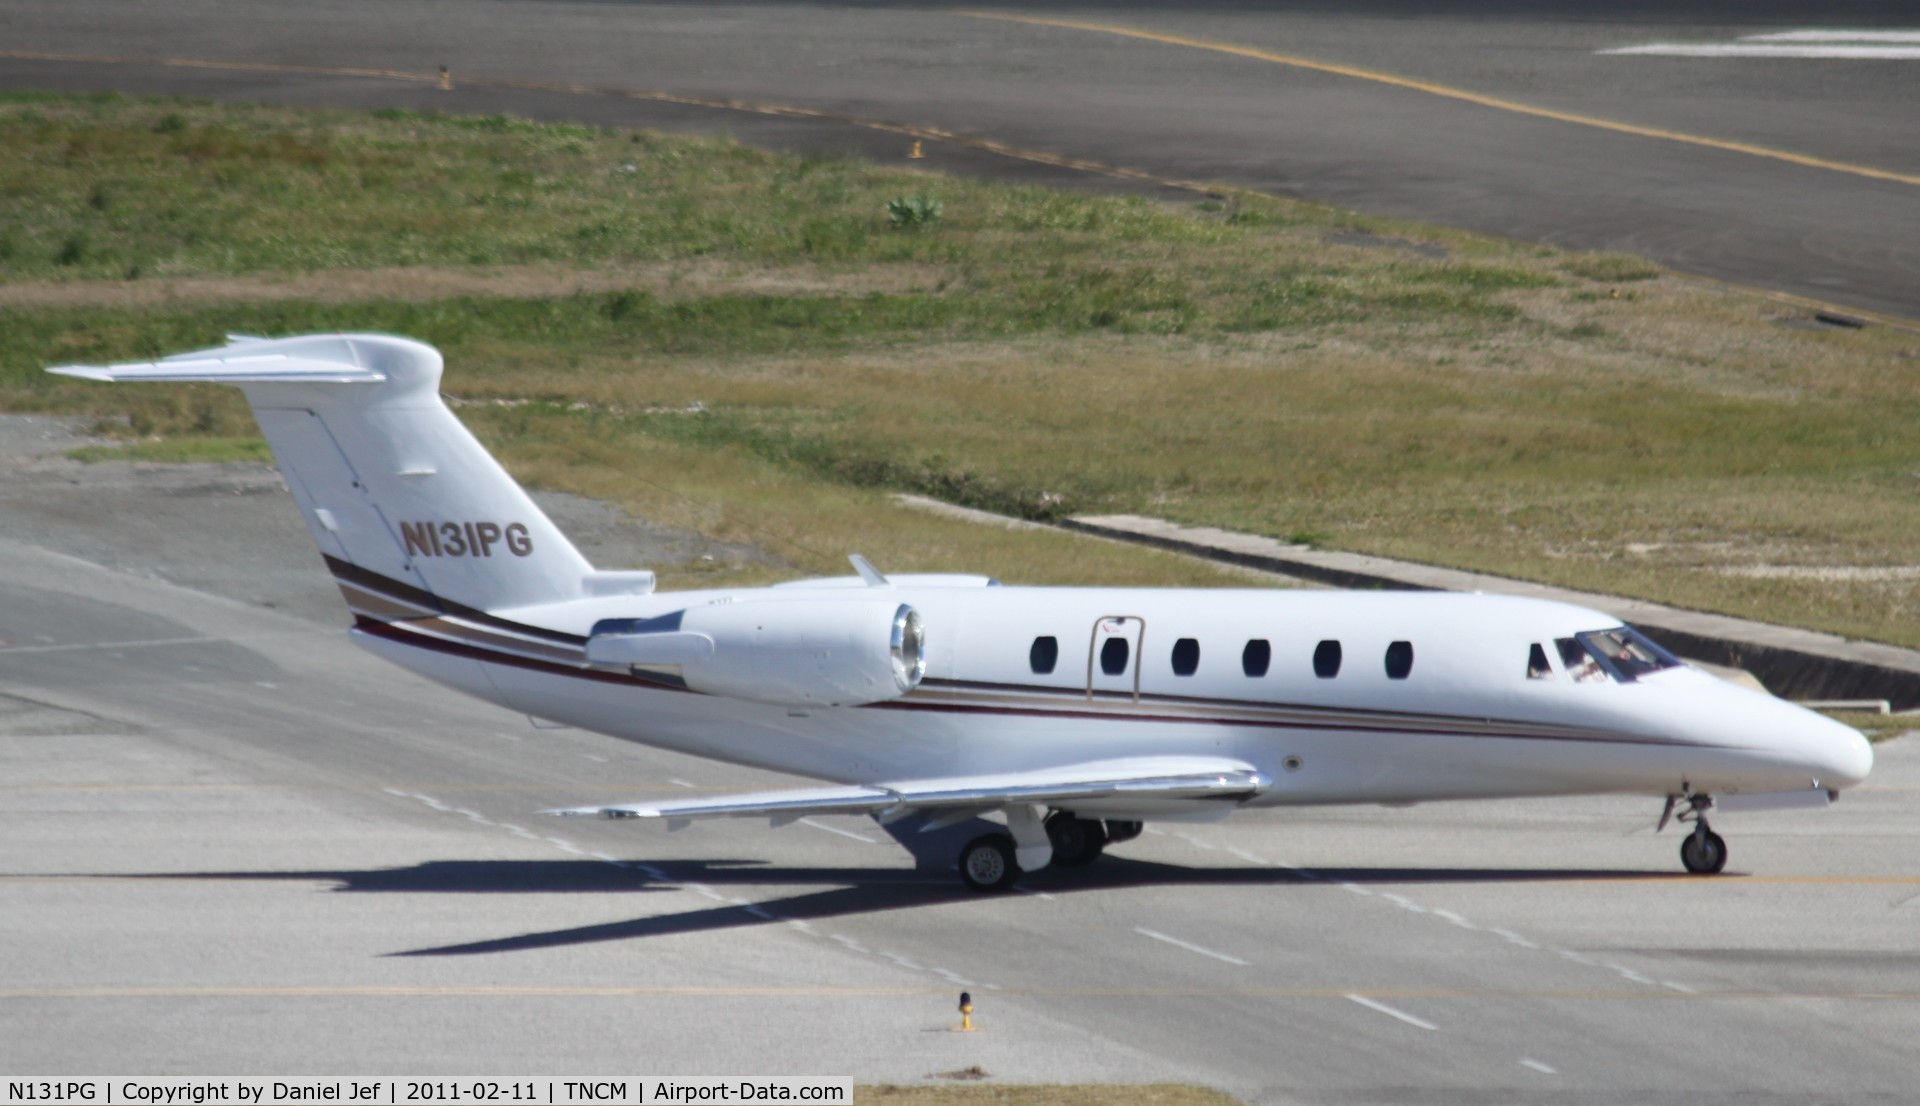 N131PG, 1986 Cessna 650 Citation III C/N 650-0126, N131PG taxing to parking at TNCM